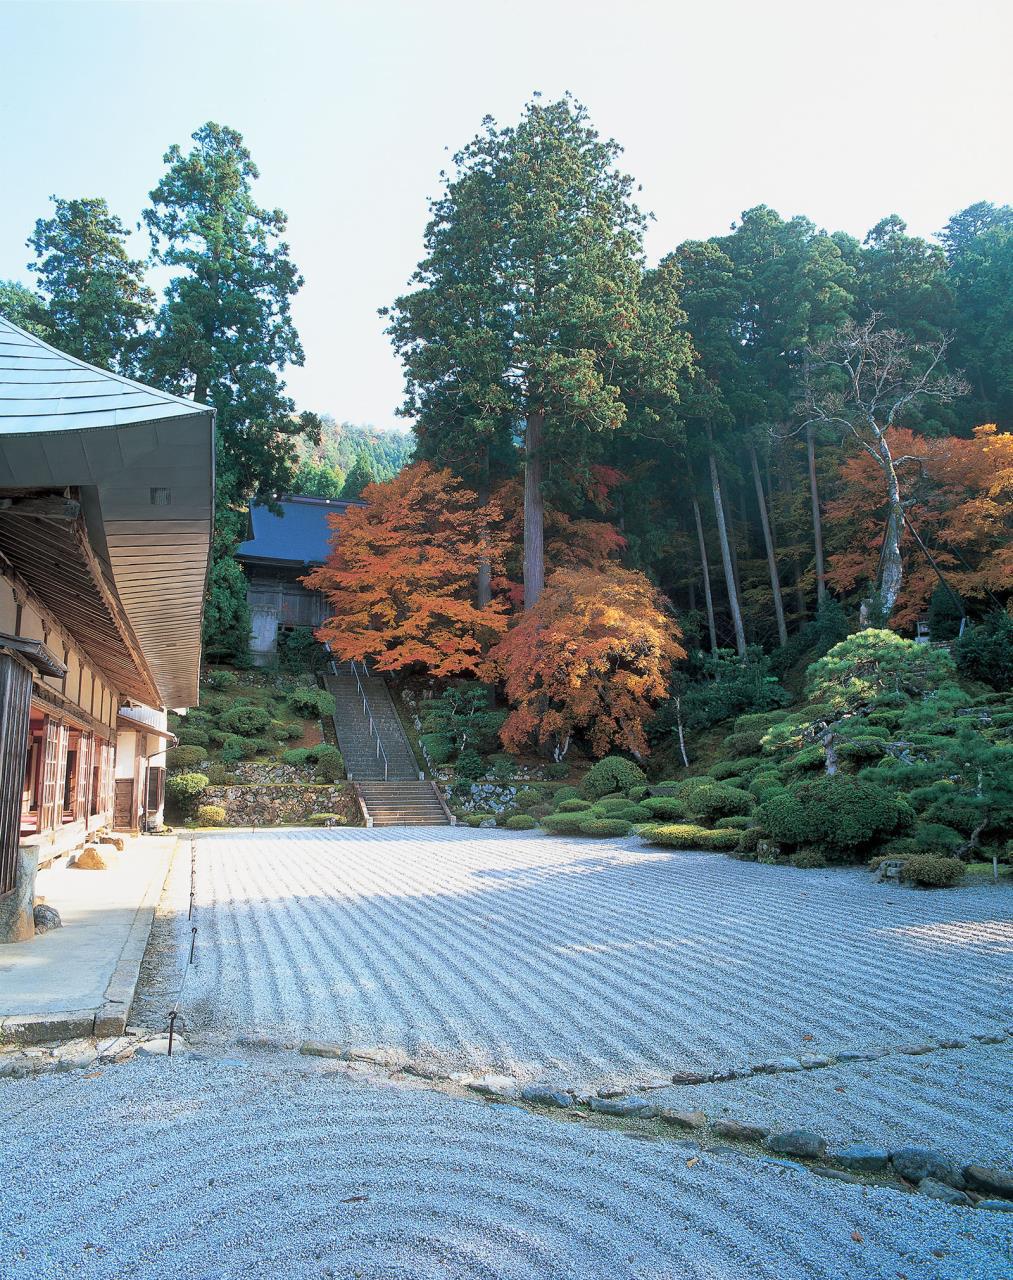 Experience of a Japanese garden full of colored leaves